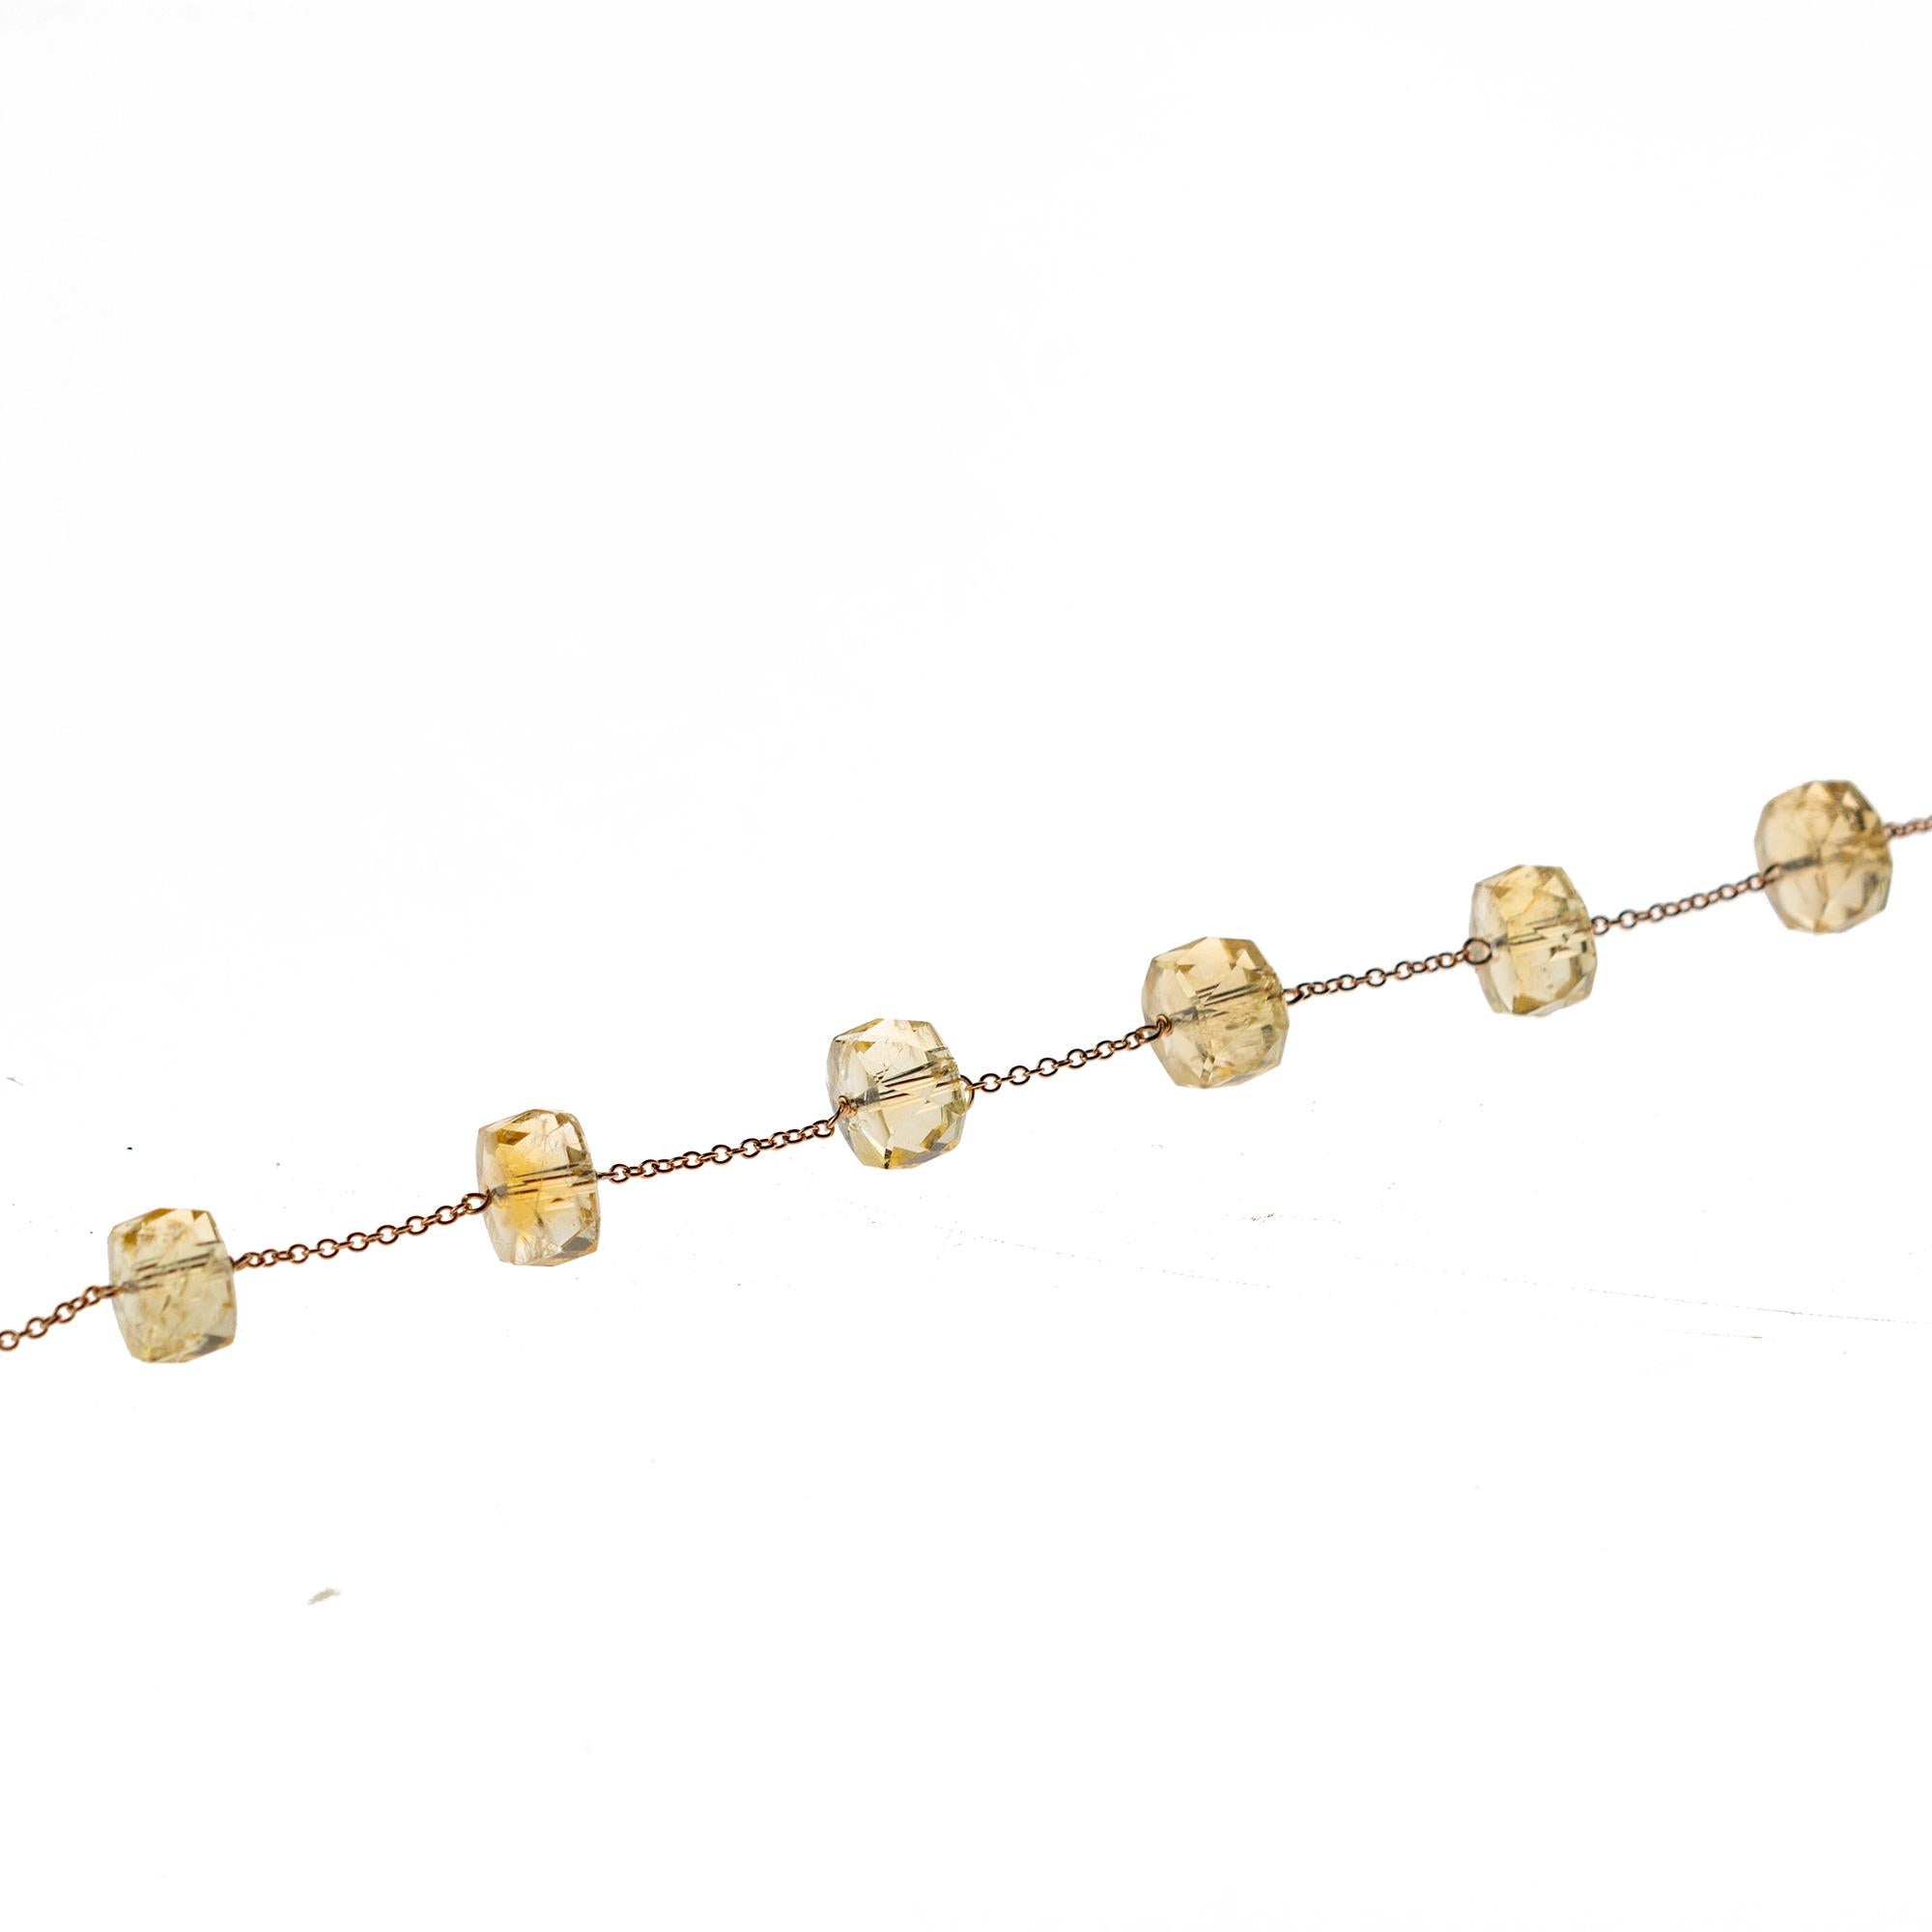 Intini Jewels signature quality on a modern and contemporary design jewel.

Six gems of top quality pure citrine quartz embellish a delicate 9 karat pink / rose gold chain bracelet.

An elegant touch of glamour at your fingertips. Let yourself be